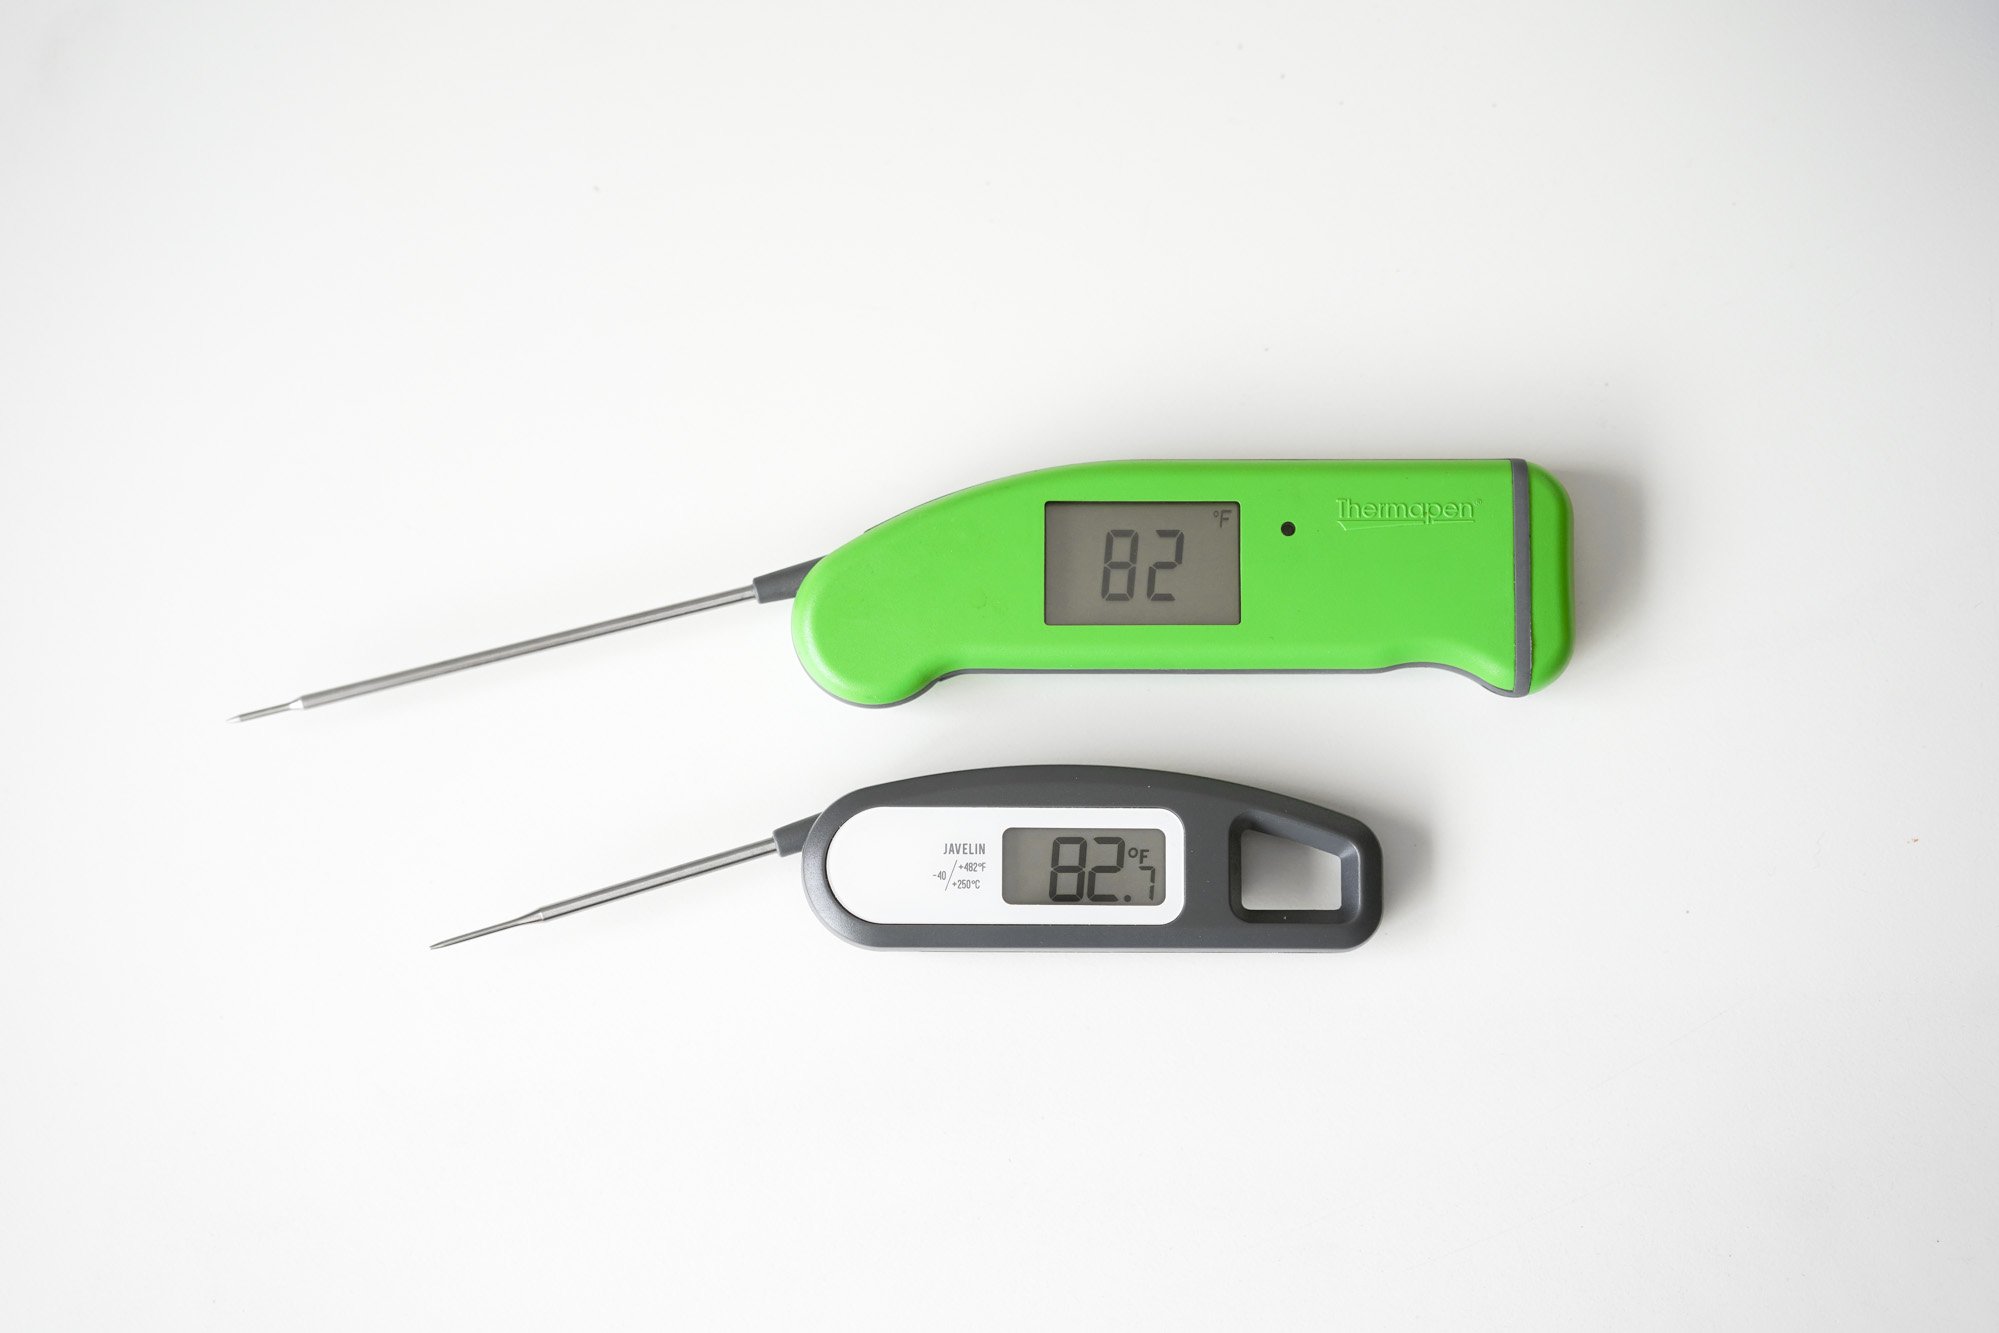 Keeping Hot Food Hot: Food Thermometer Use and Calibration for